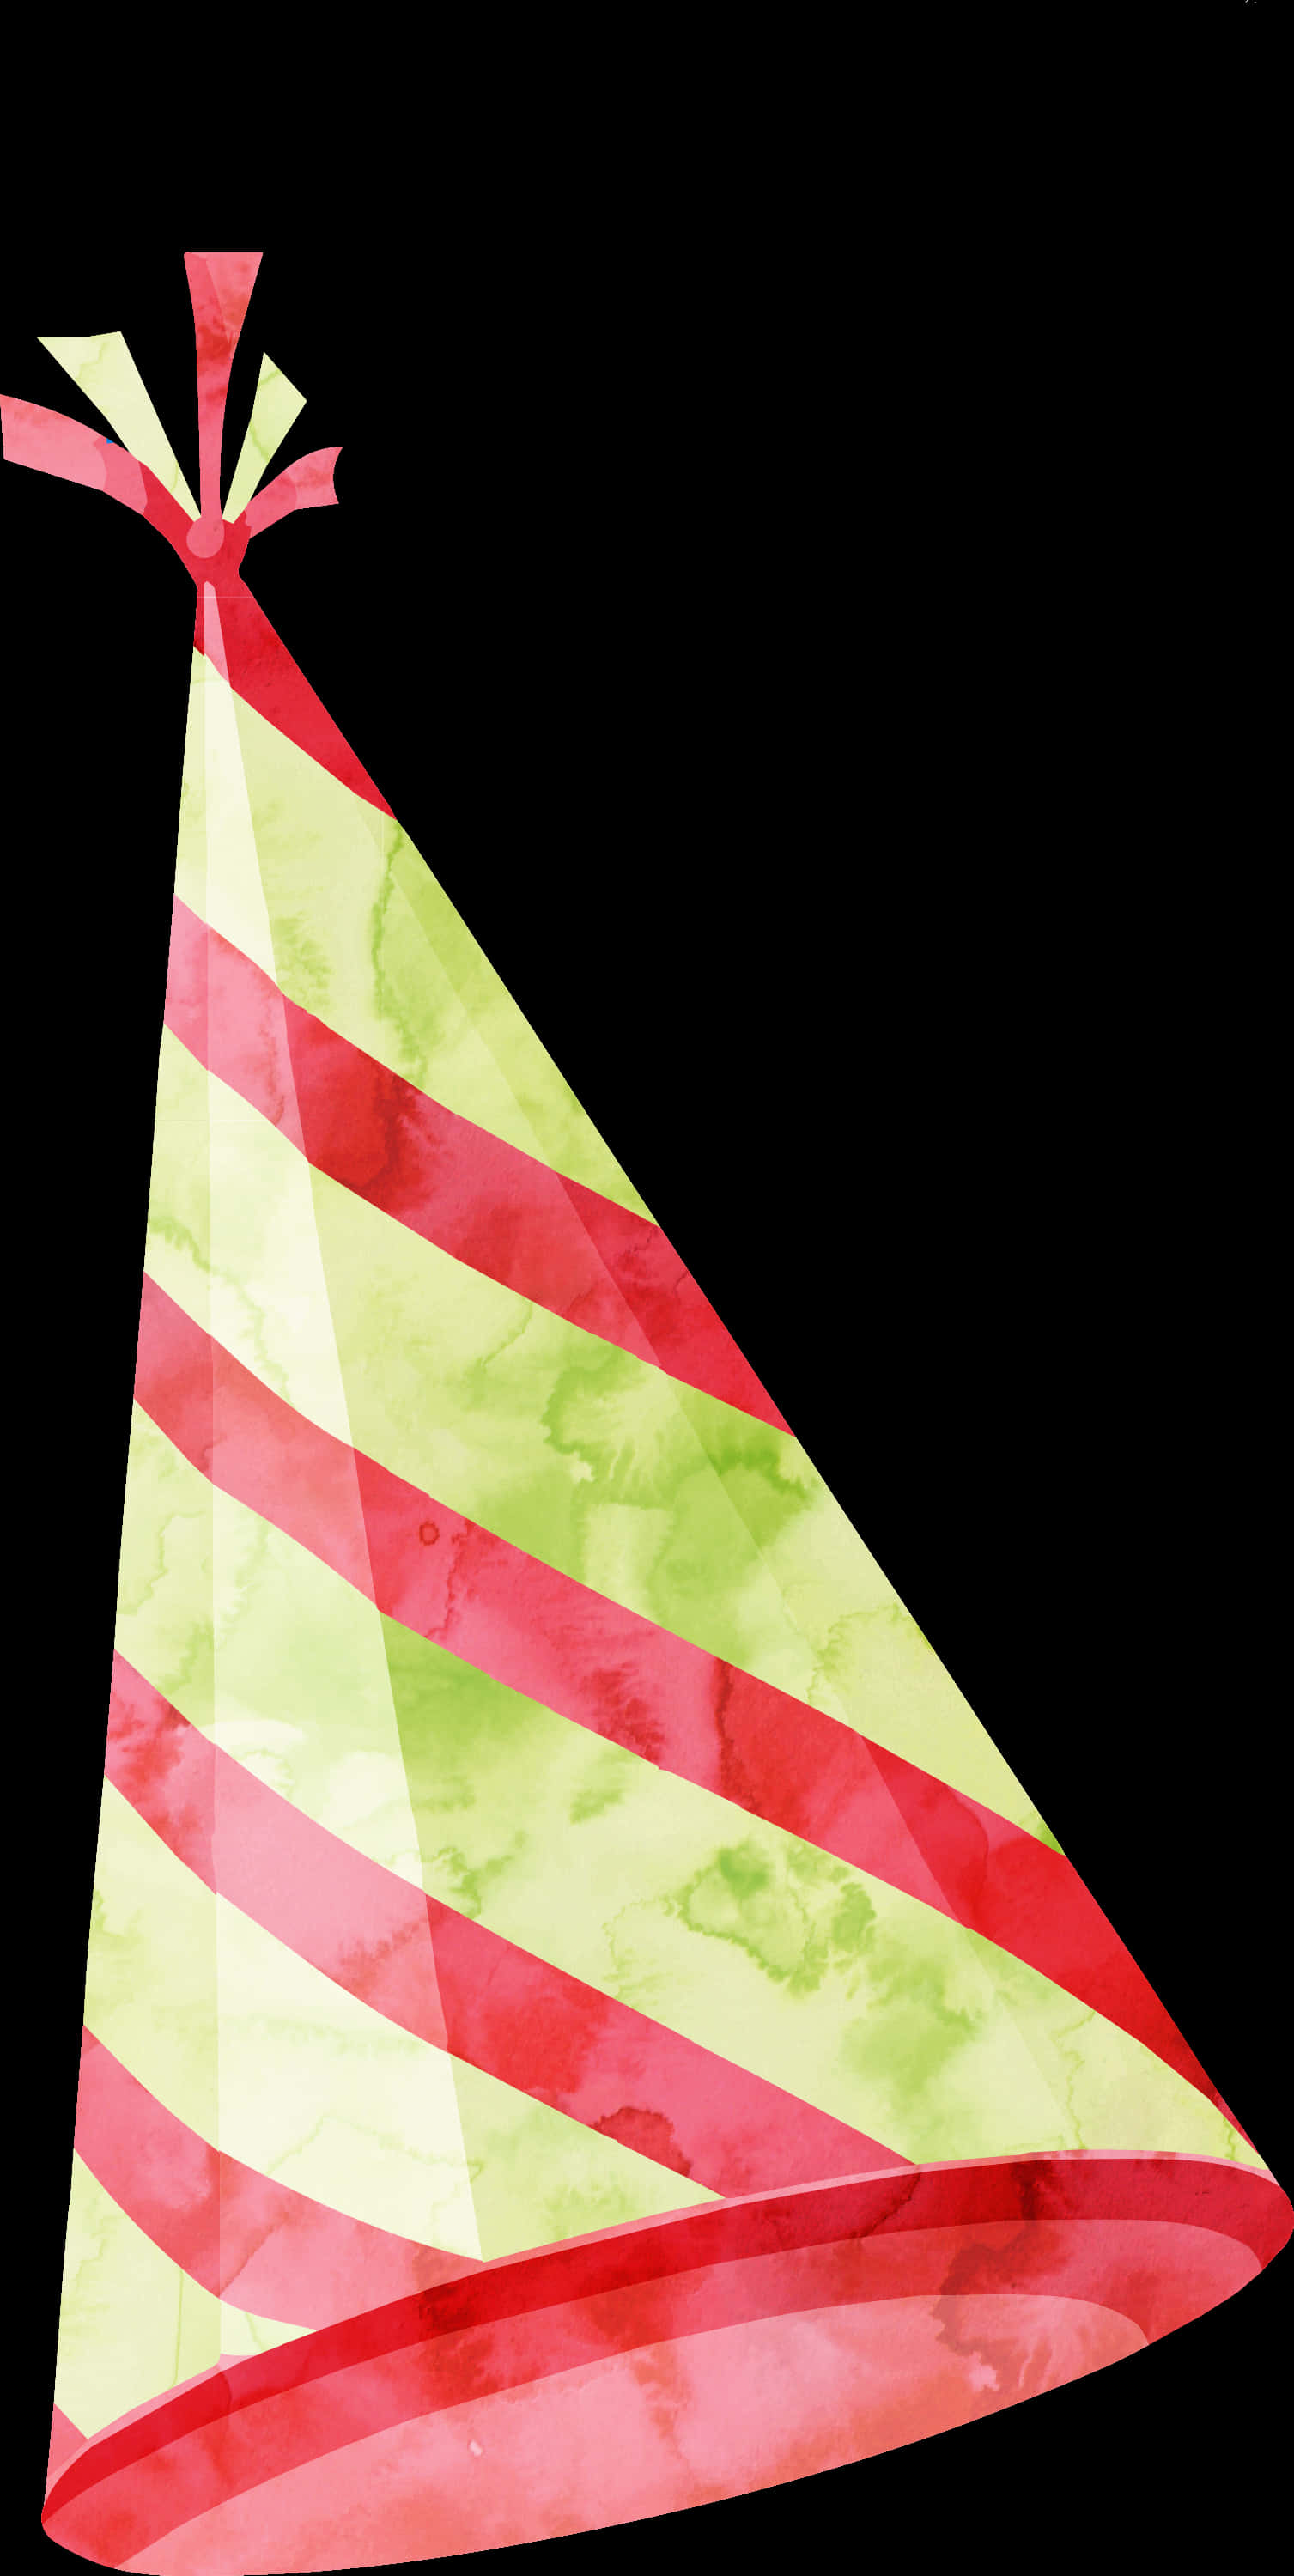 A Triangular Cone Shaped Hat With Red Stripes